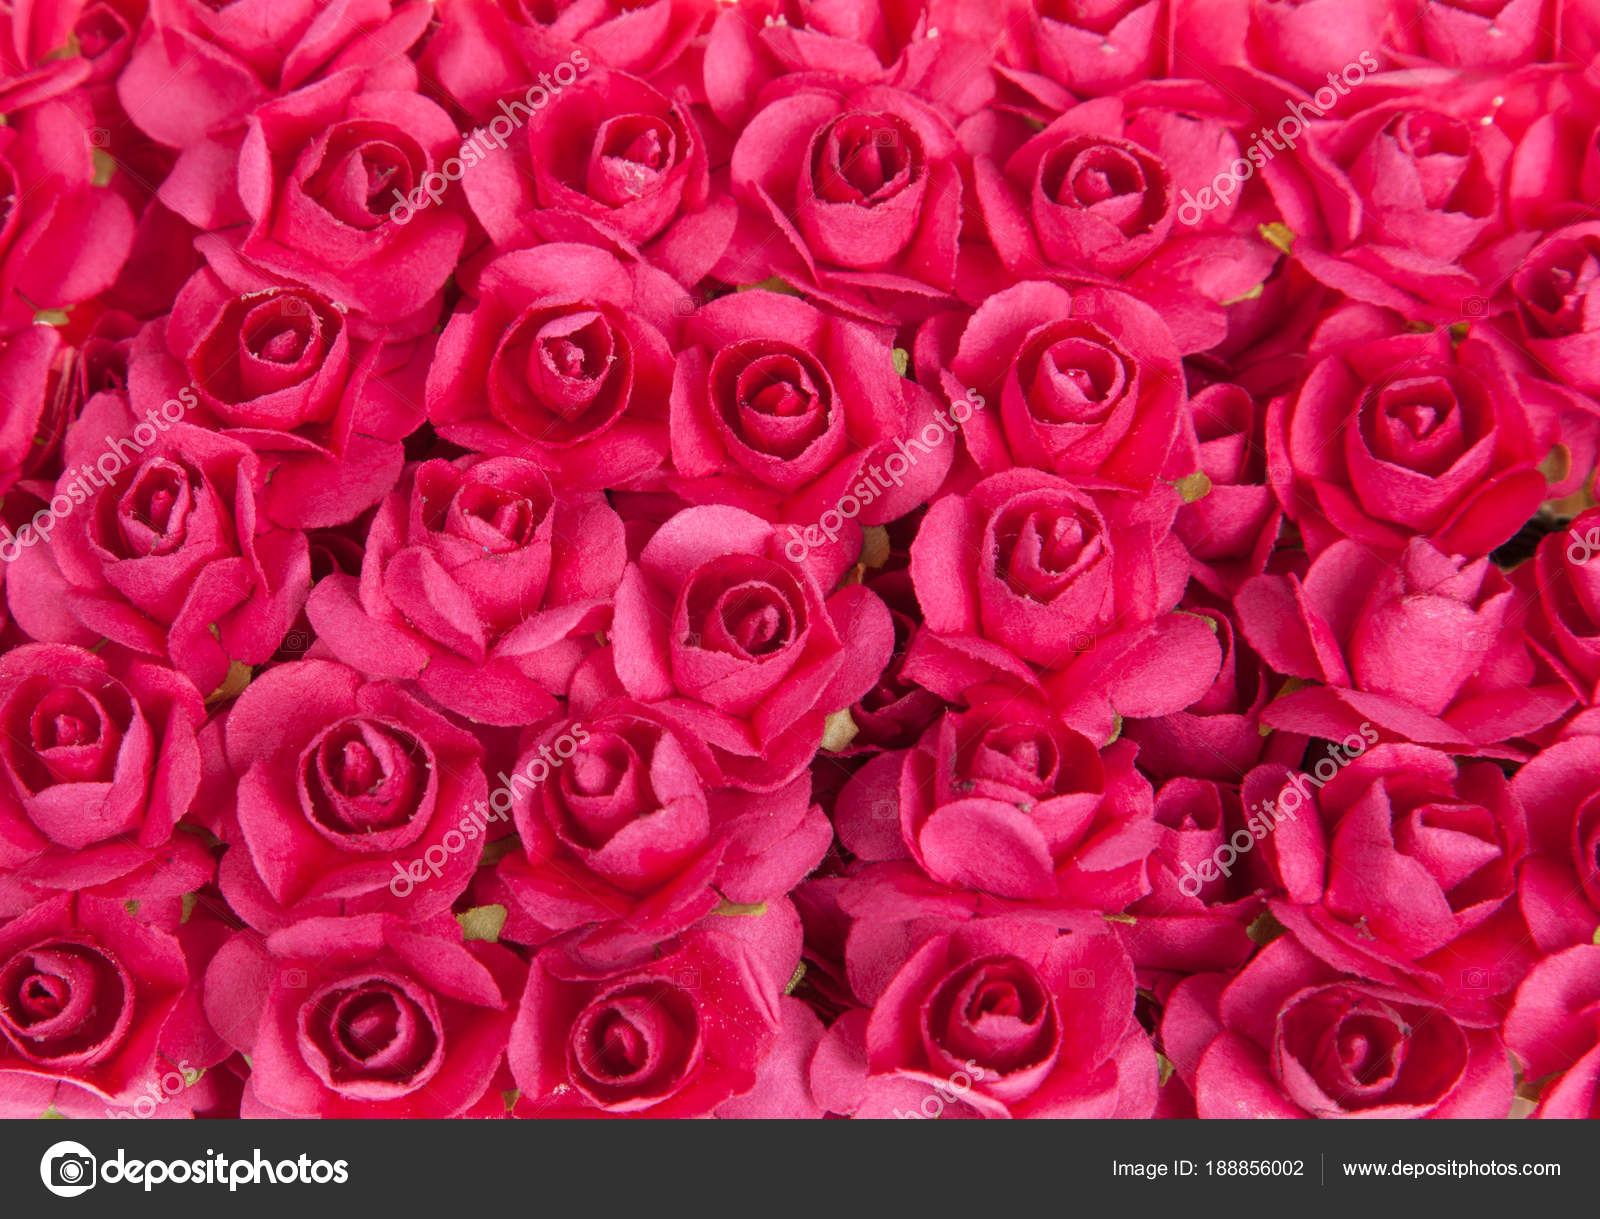 Pictures A Red Rose Flower Background Of Red Rose Flowers Many Red Roses Close Up Stock Photo C Dechevm 188856002